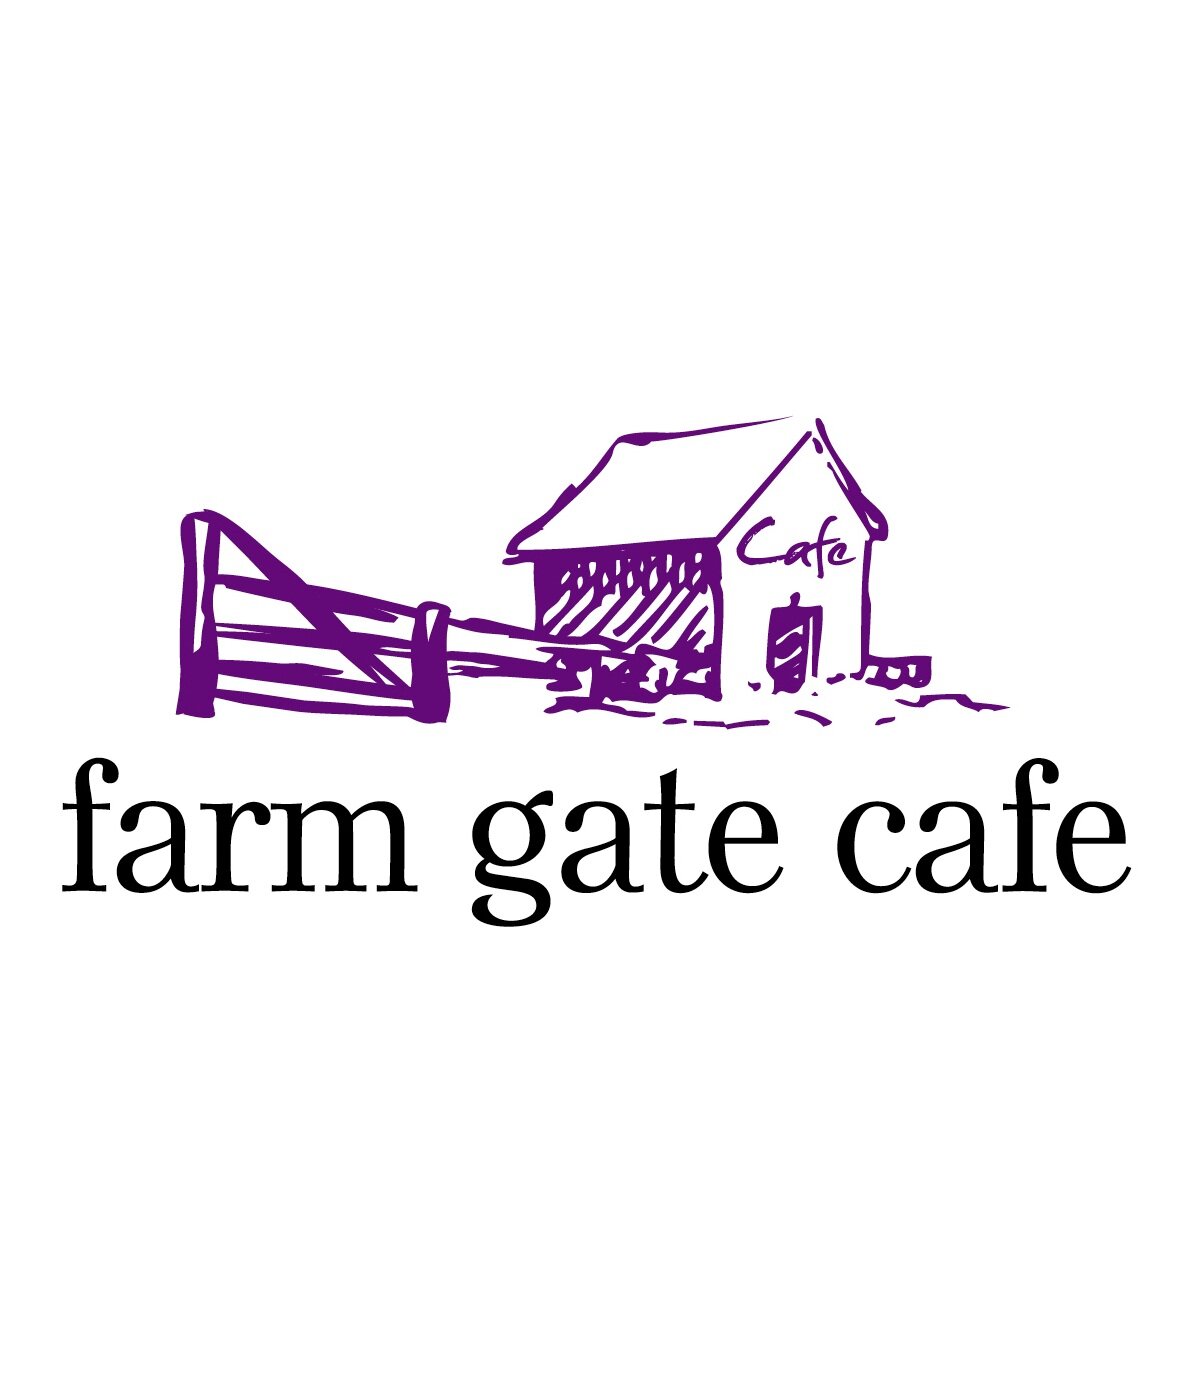 The Farm Gate Cafe has been serving the Wyong communicty since 2005. Open for breakfast, lunch and dinner 6 days a week.